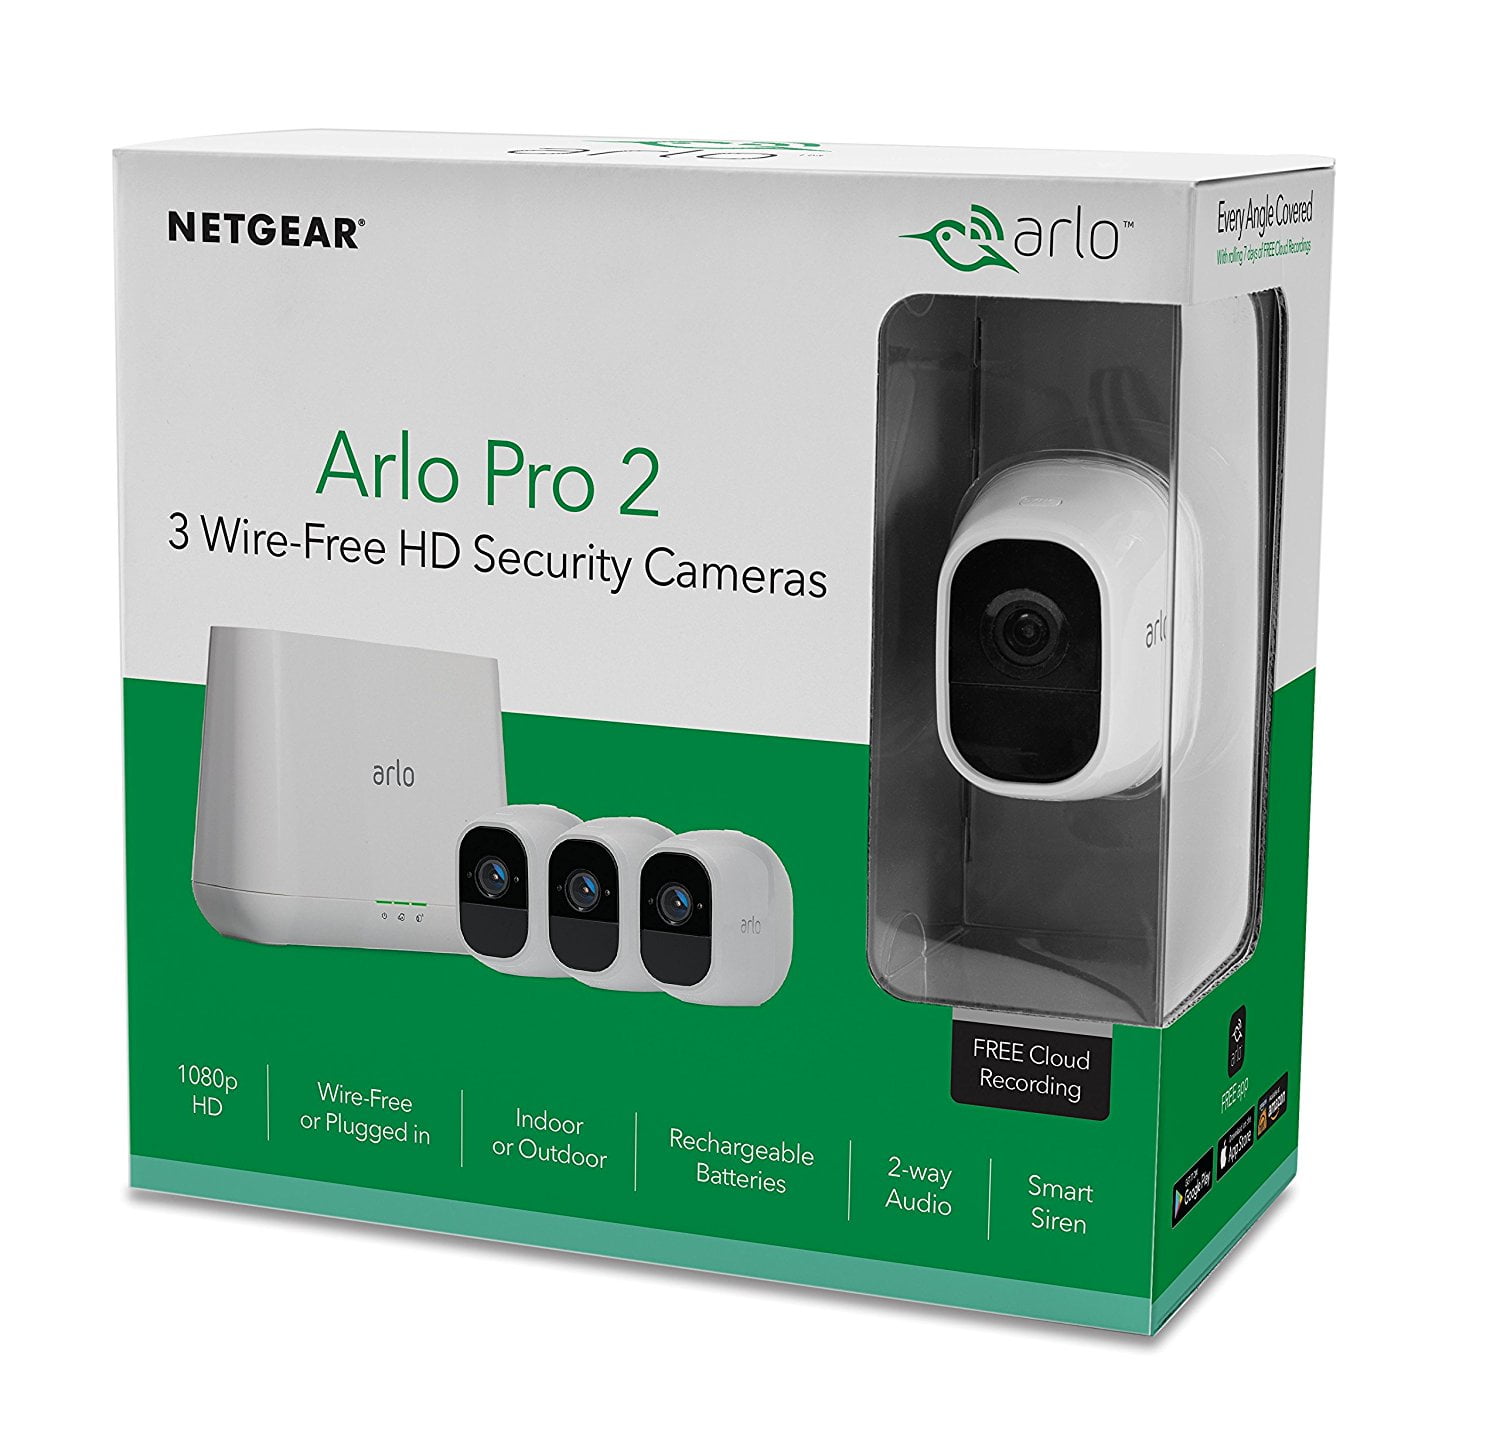 Arlo Pro 2 3 WireFree Camera 1080P HD Smart Security System (VMS4330P100NAS) Motion